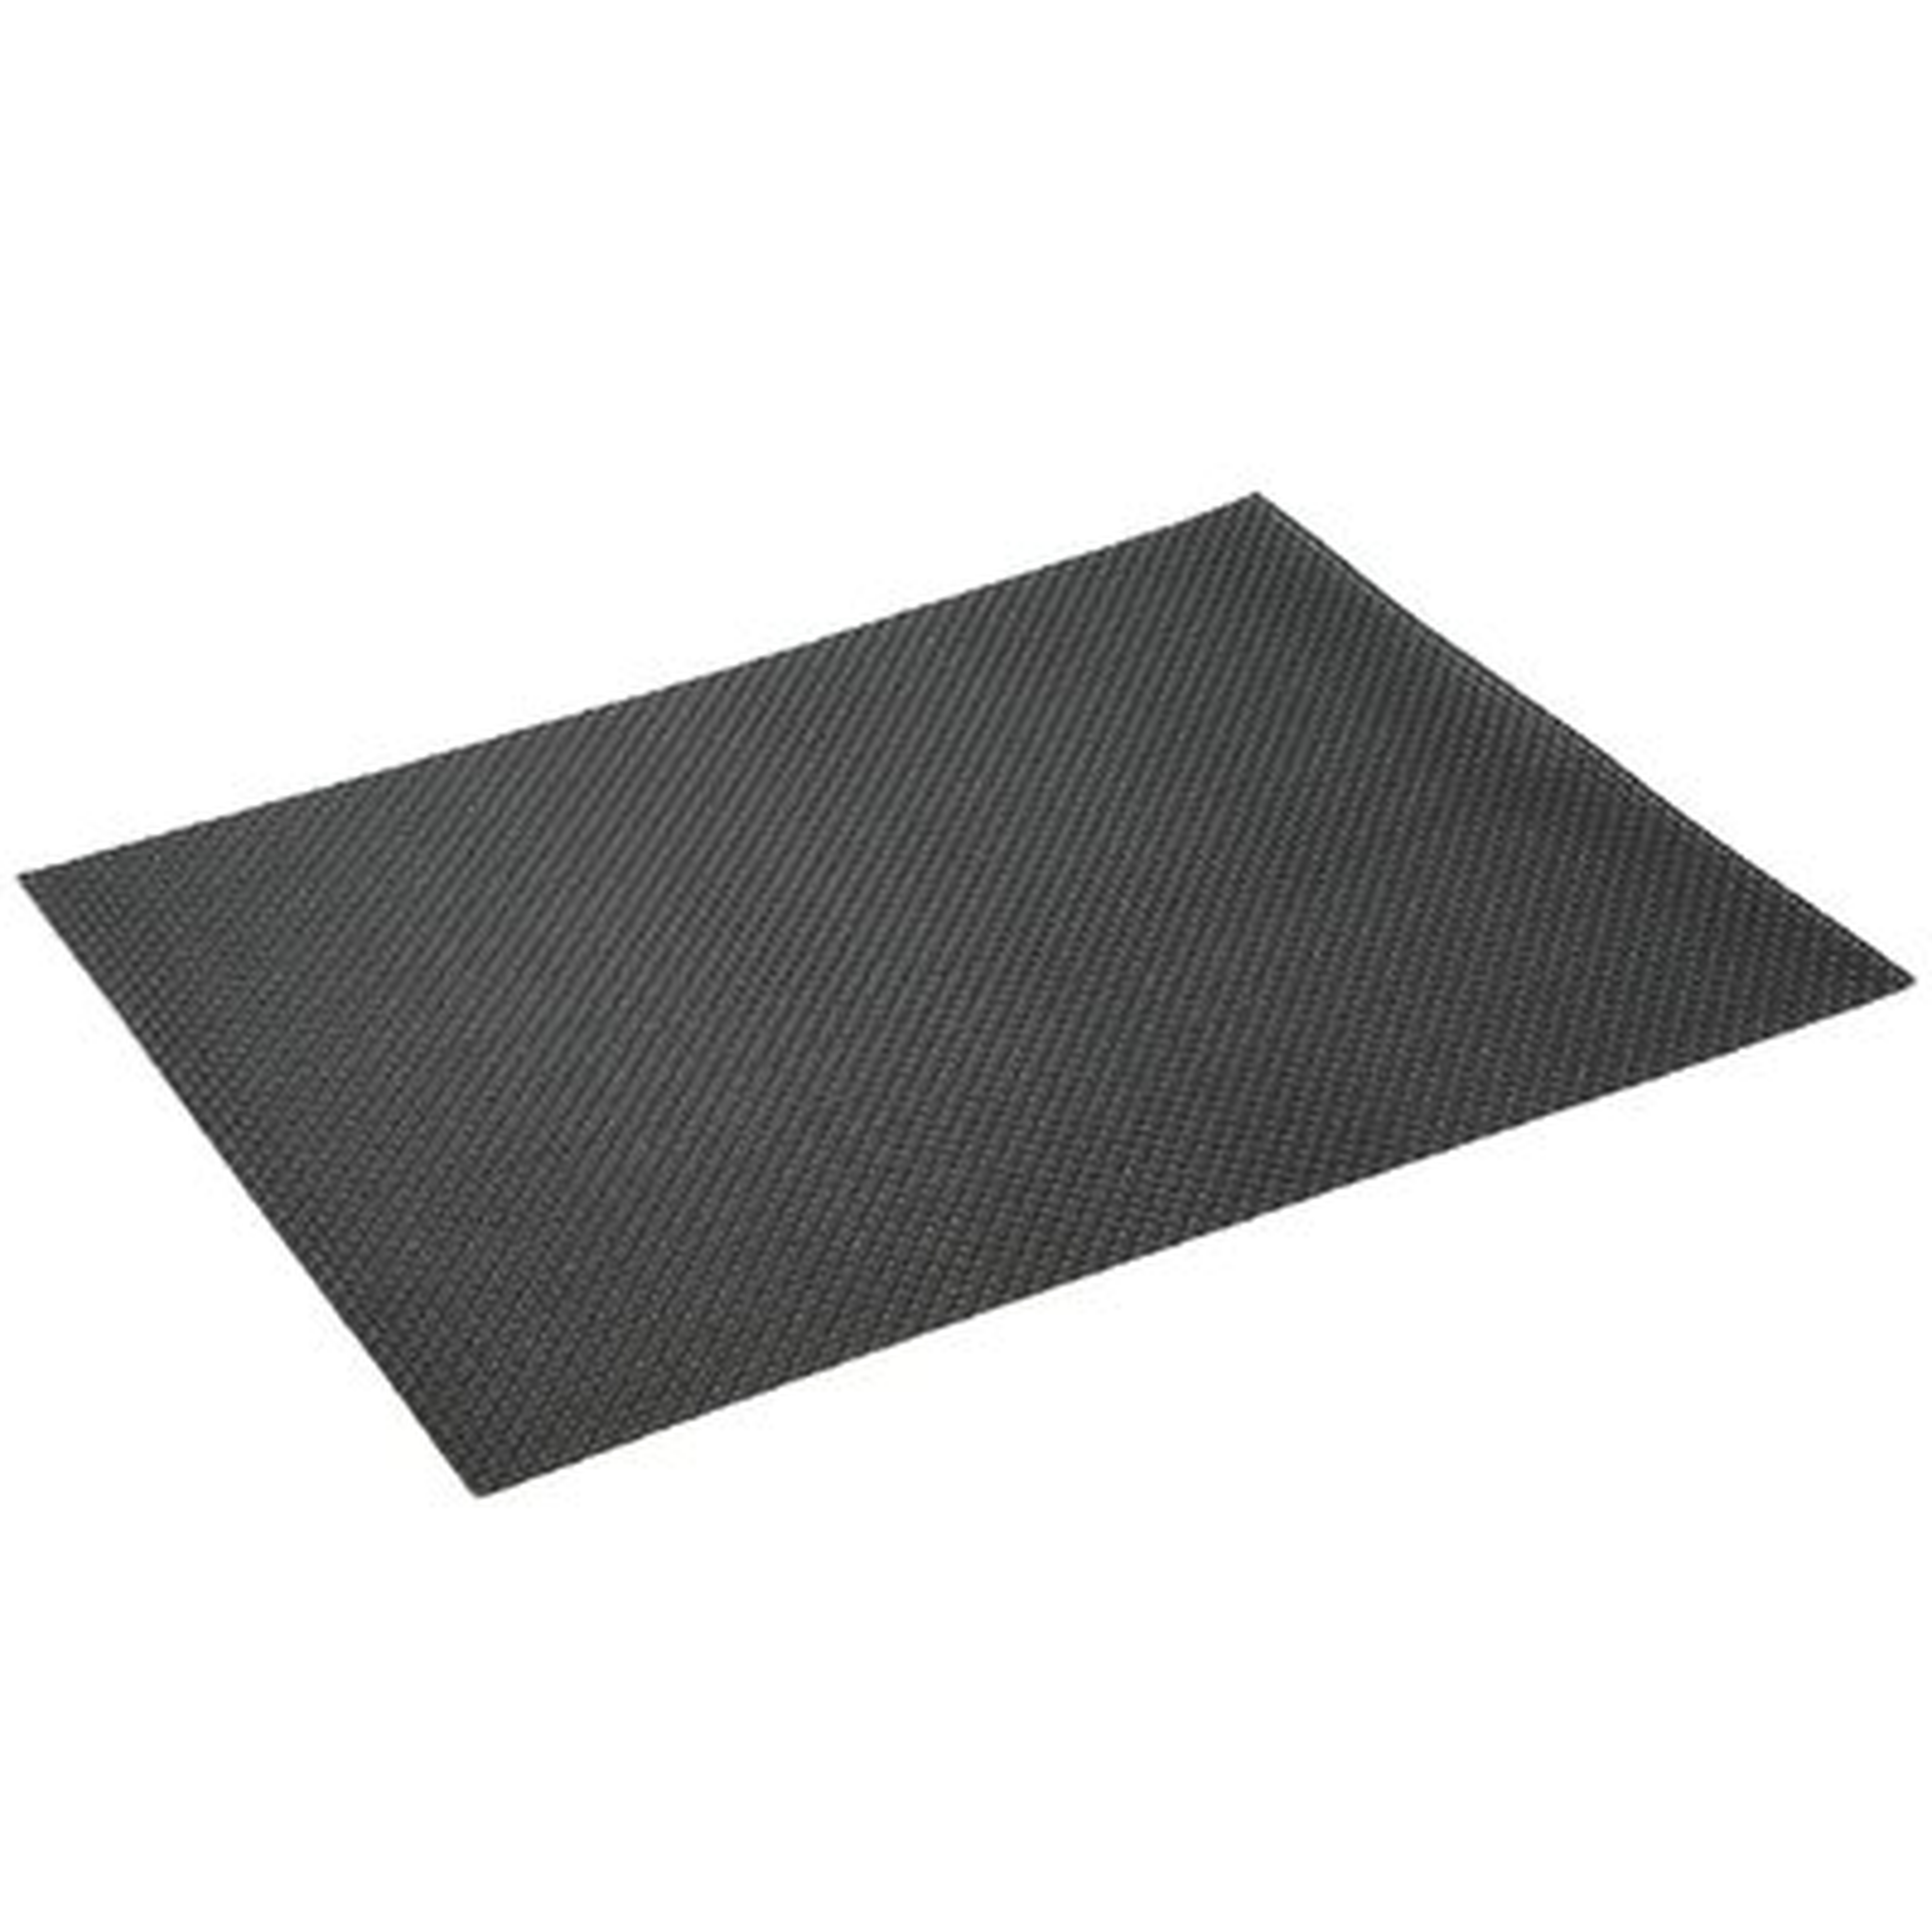 Chilewich Easy Care Basketweave Rectangular Placemat - AllModern